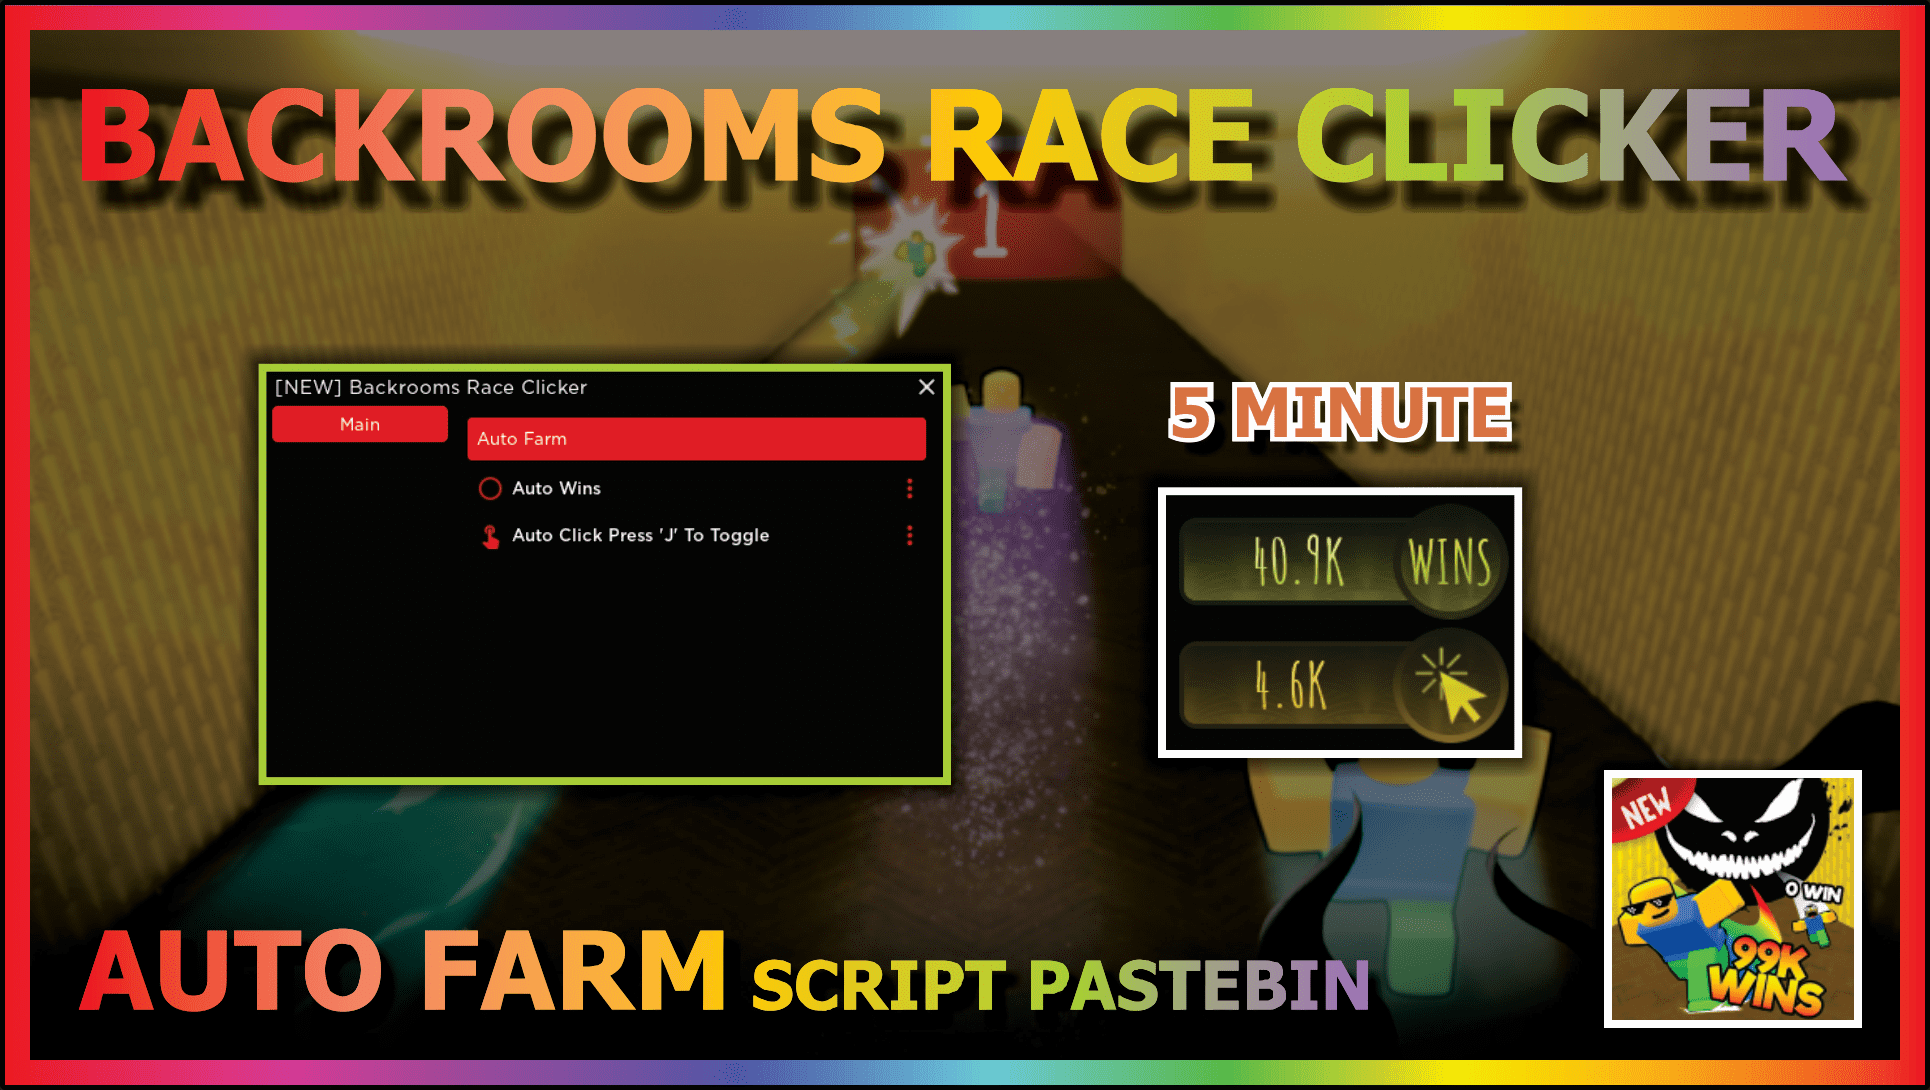 Backrooms Race Clicker Codes – New Codes! – Gamezebo